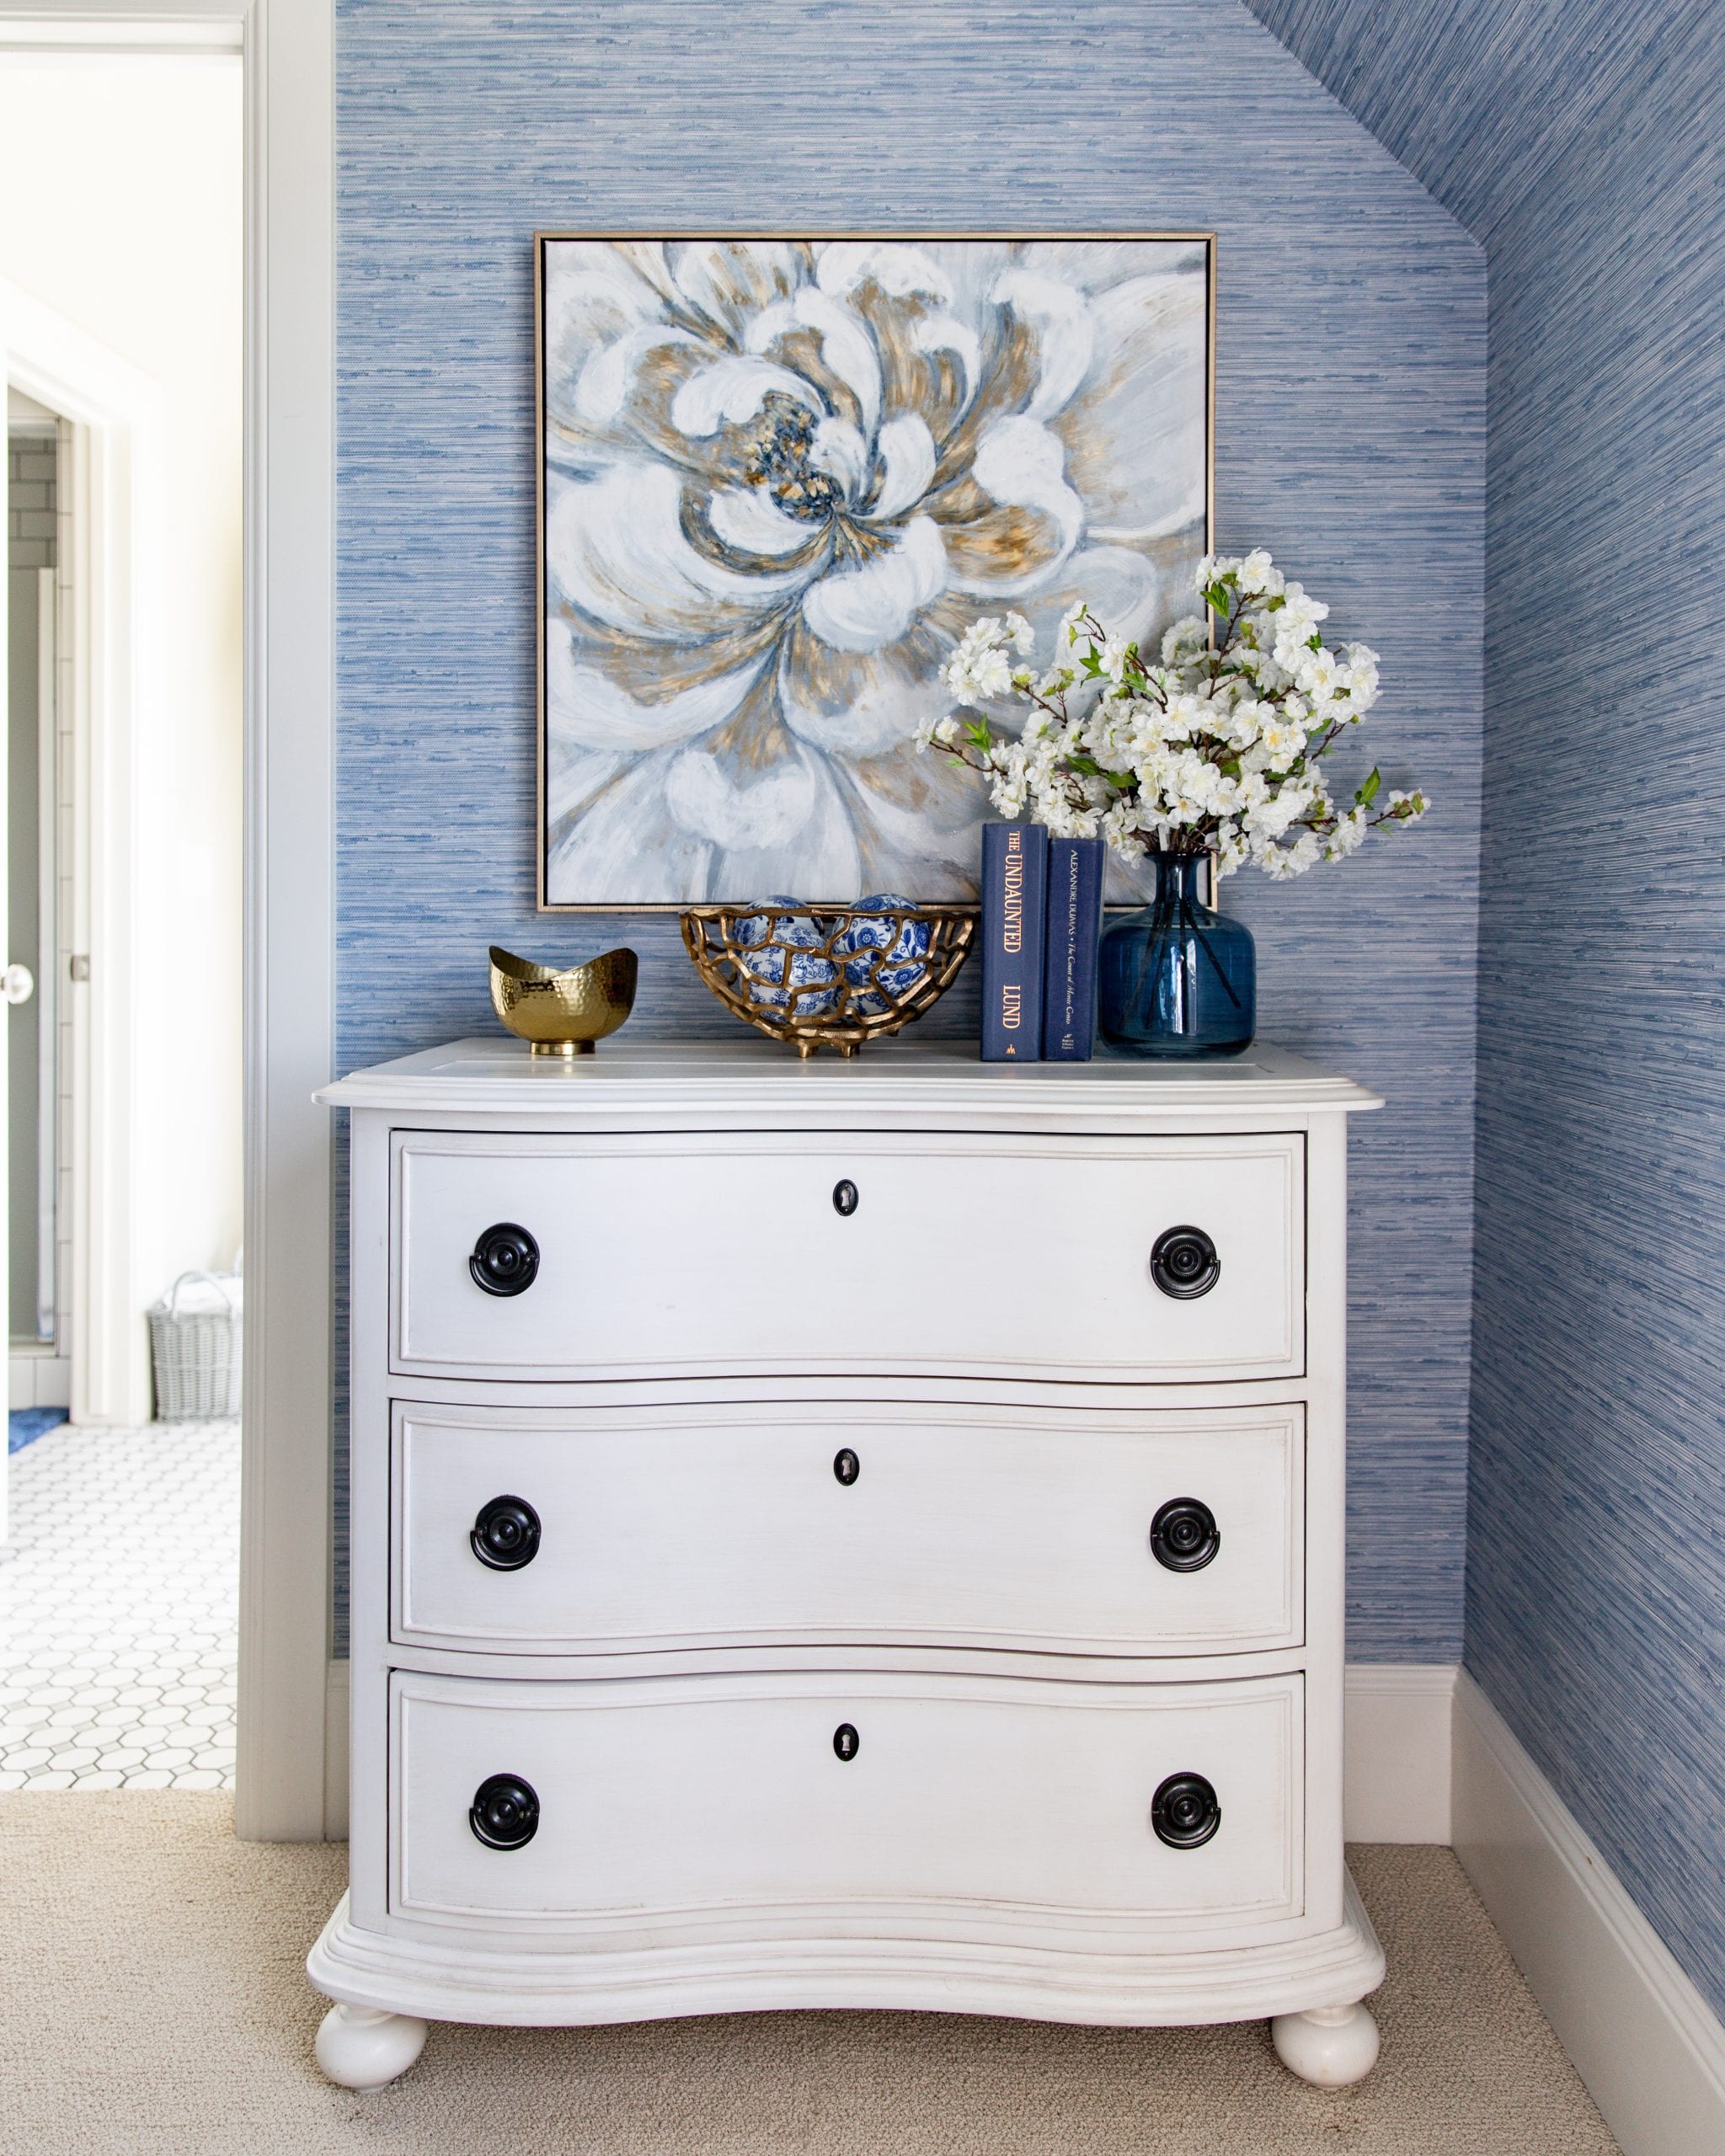 dresser with flowers